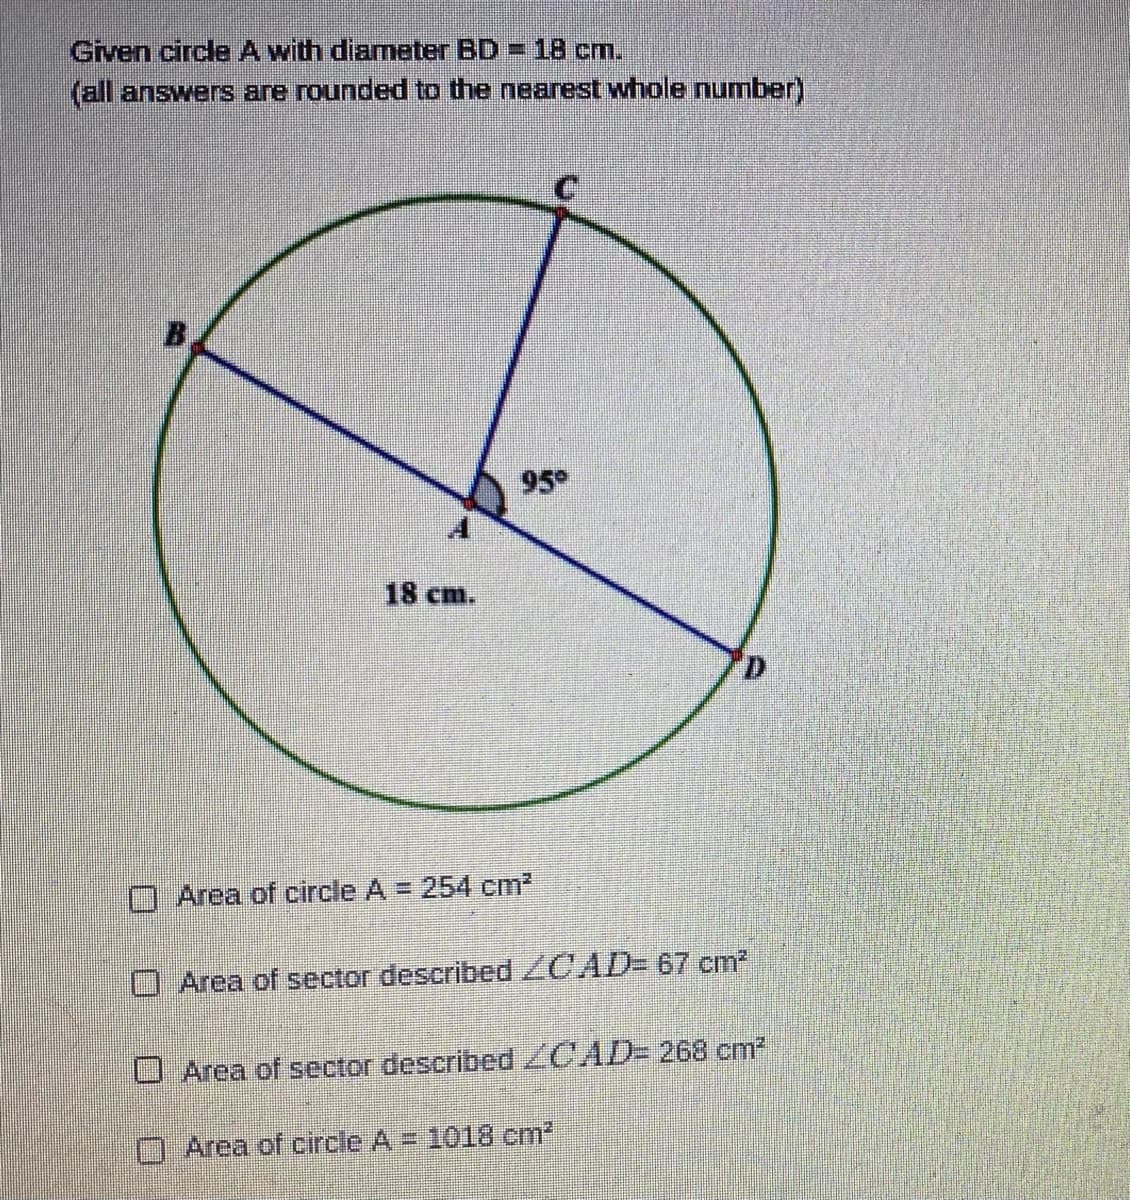 Given circle A with diameter BD
(all answers are rounded to the nearest whole number)
=18 cm.
95
18 cm.
O Area of circle A = 254 cm2
O Area of sector described ZCAD- 67 cm2
O Area of sector described ZCAD- 268 cm2
OArea of circle A = 1018 cm2
